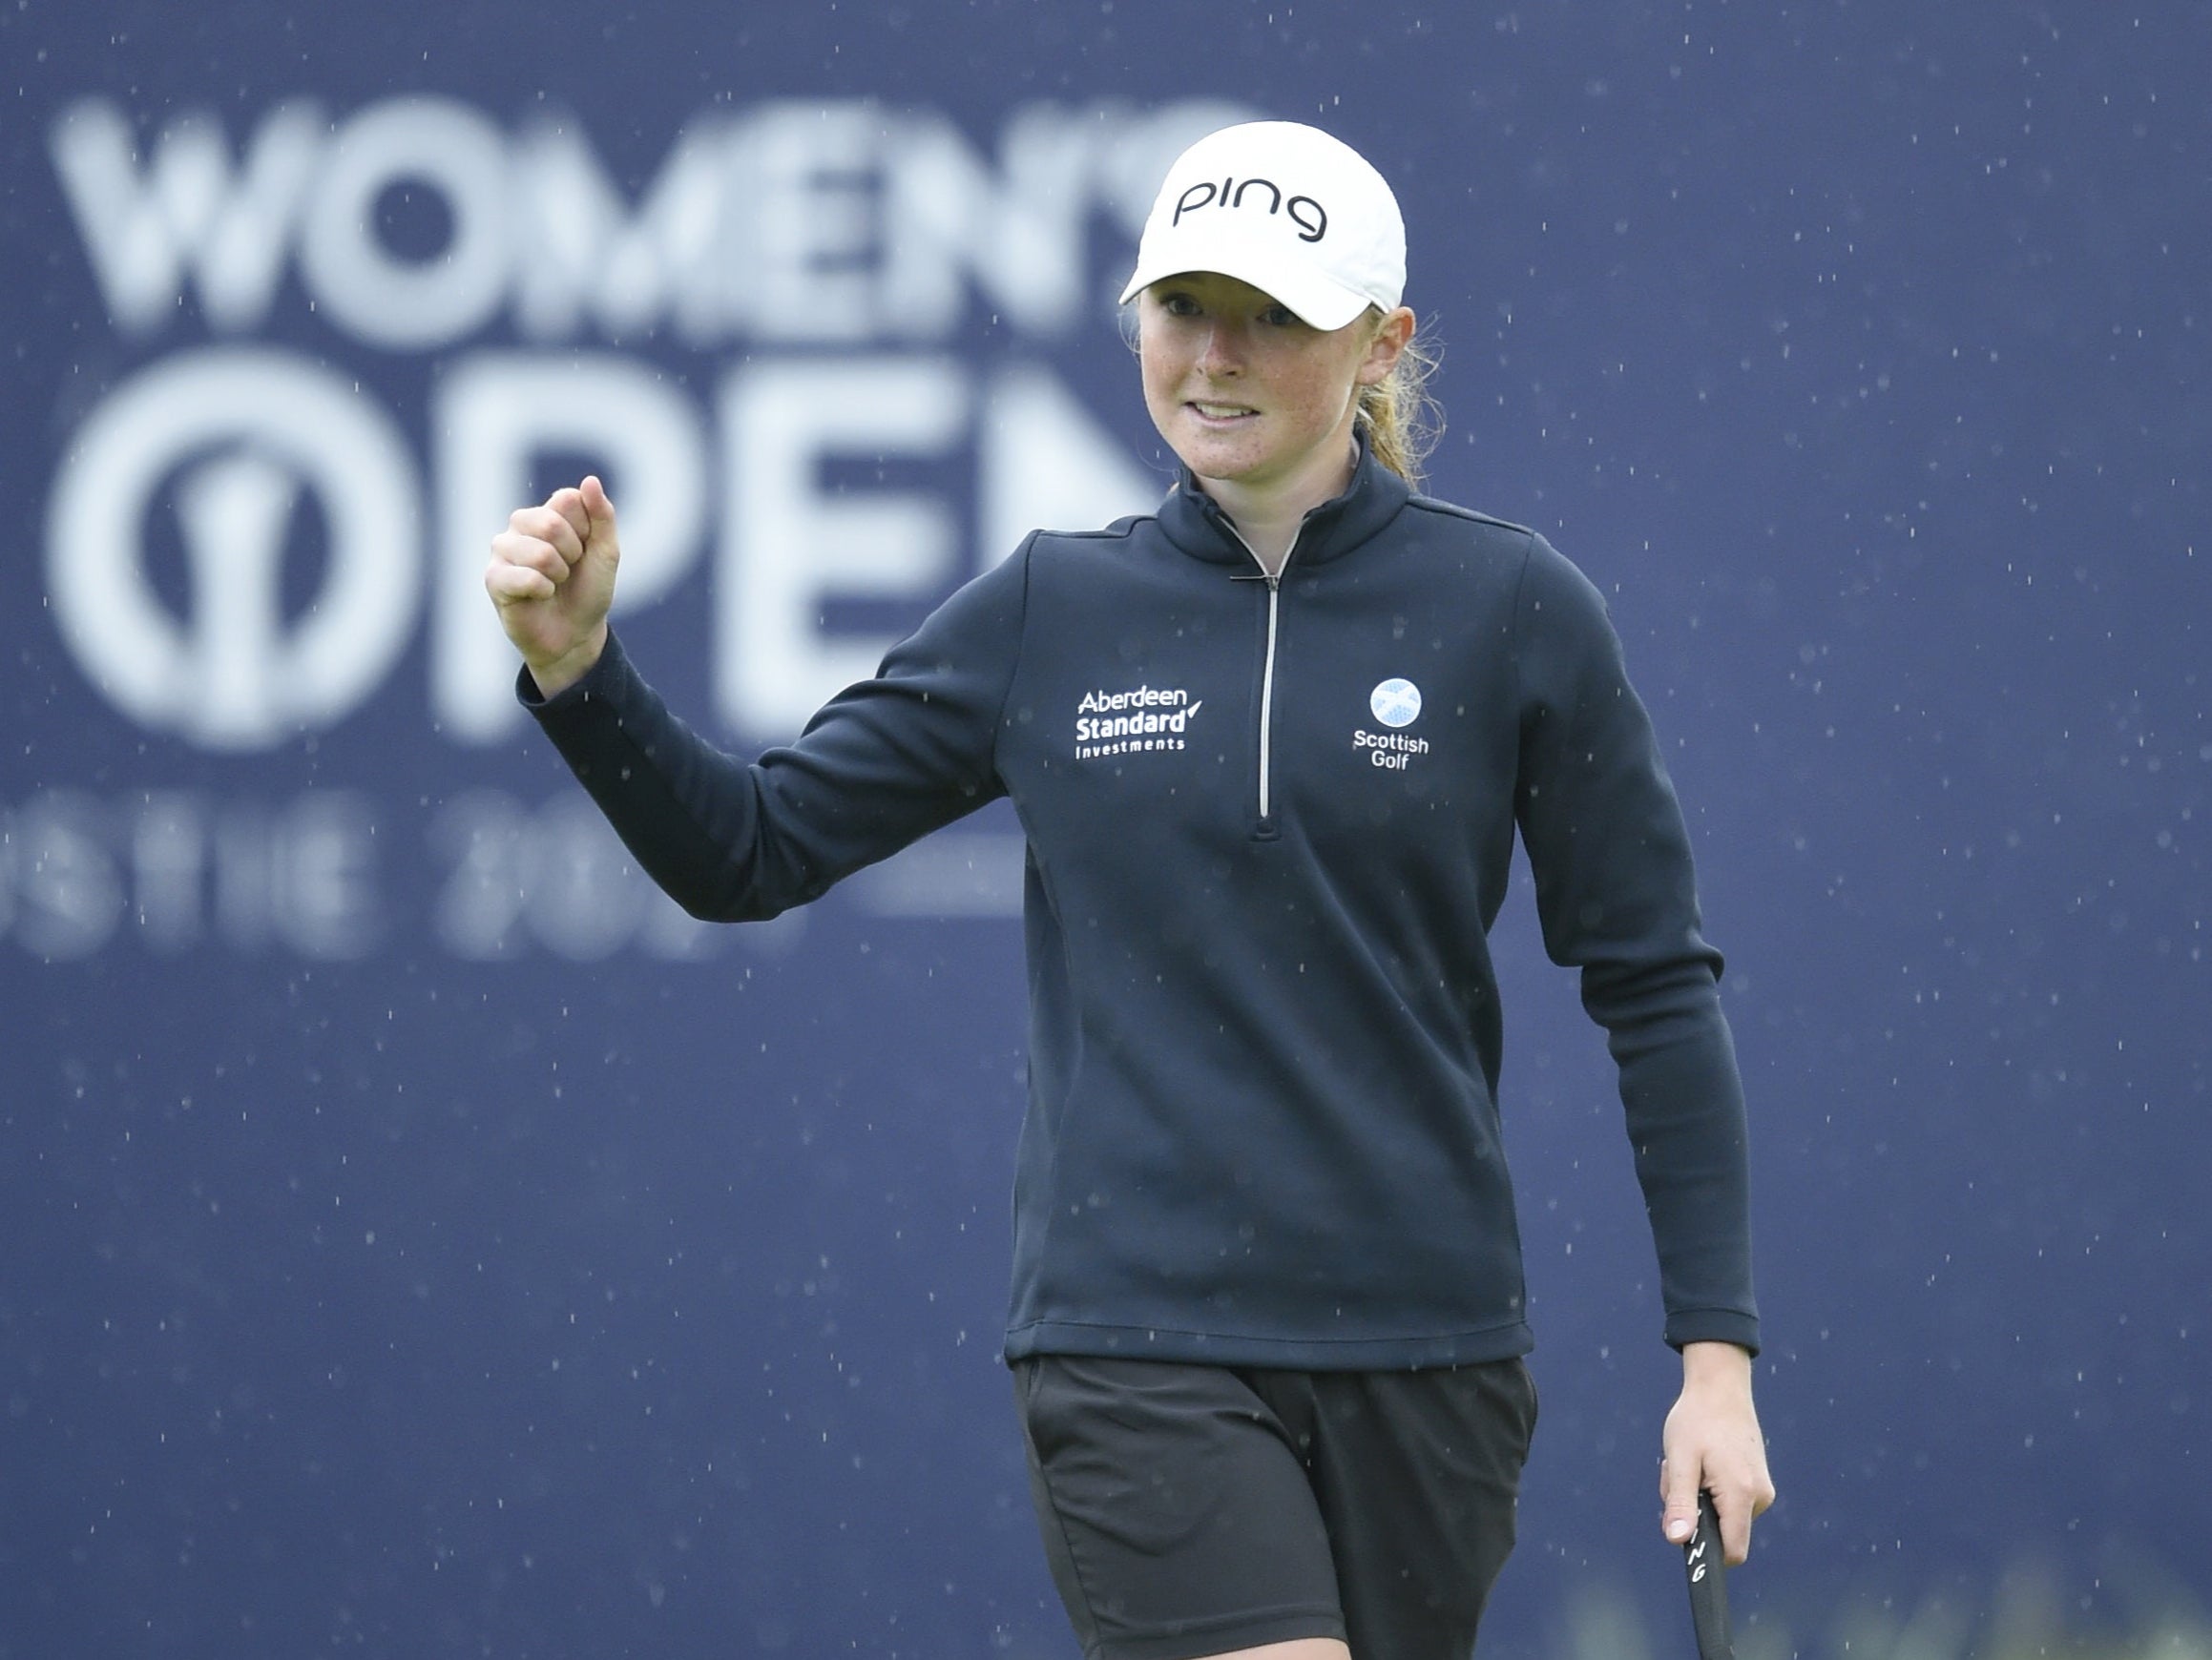 Scotland’s Louise Duncan celebrates a birdie on the 18th at the AIG Women’s Open at Carnoustie (Ian Rutherford/PA)